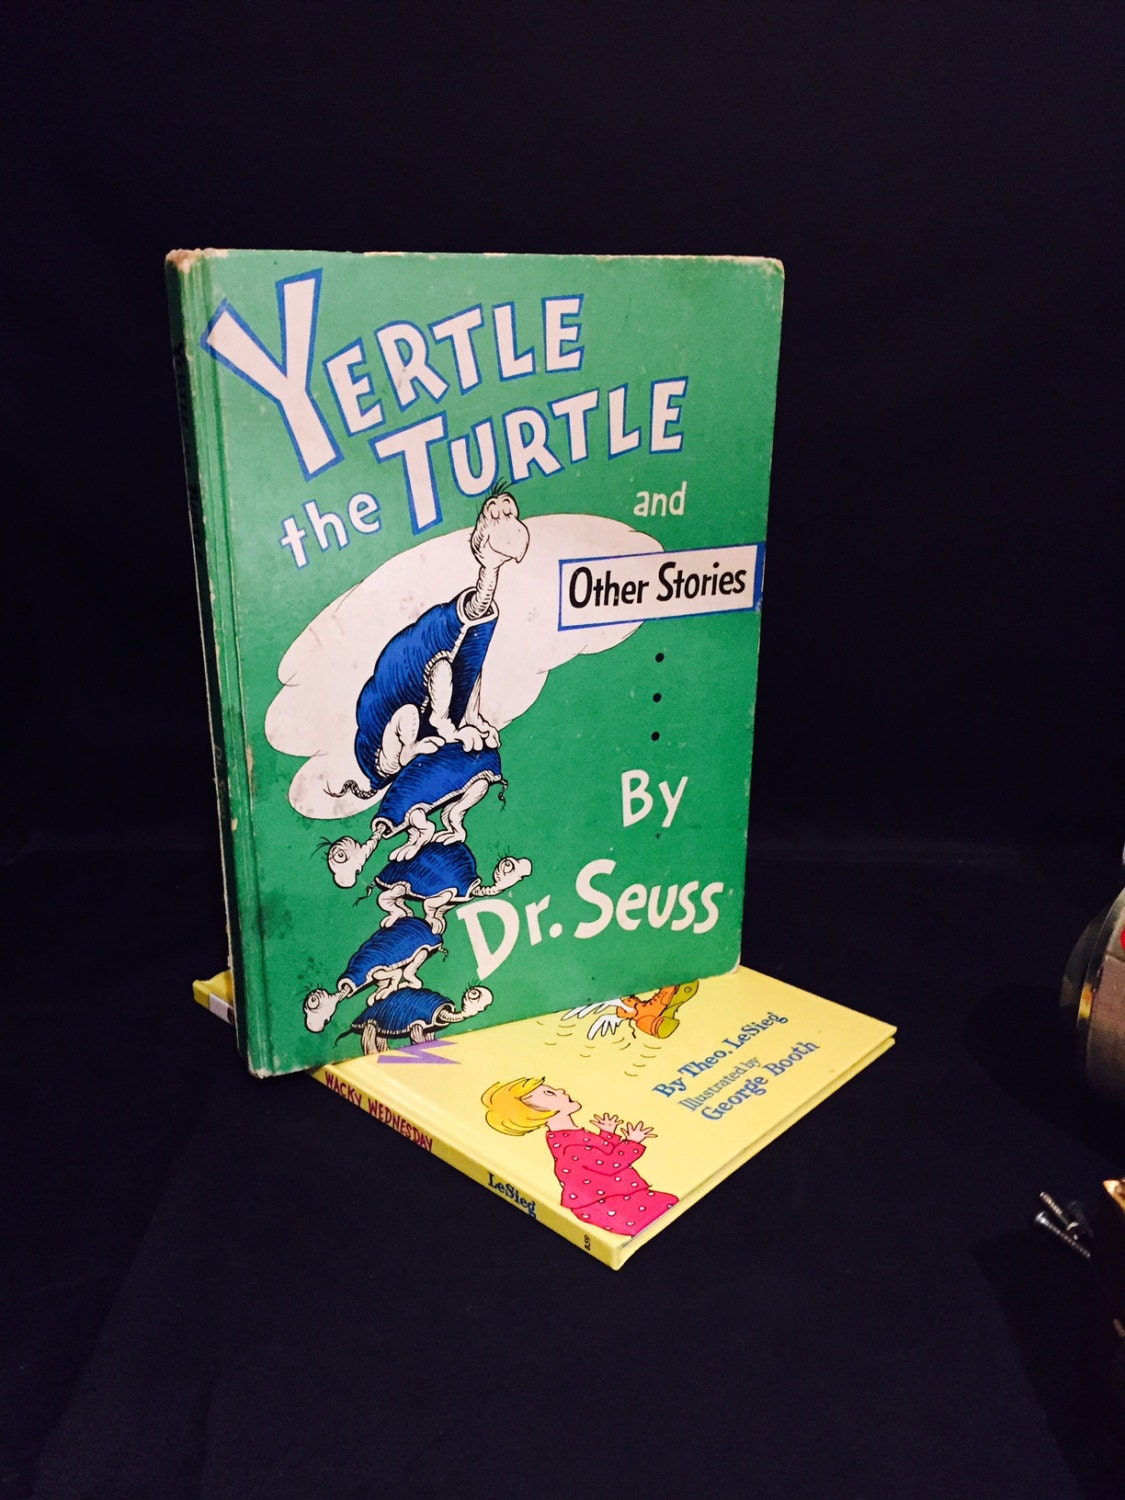 dr seuss books yertle the turtle and other stories